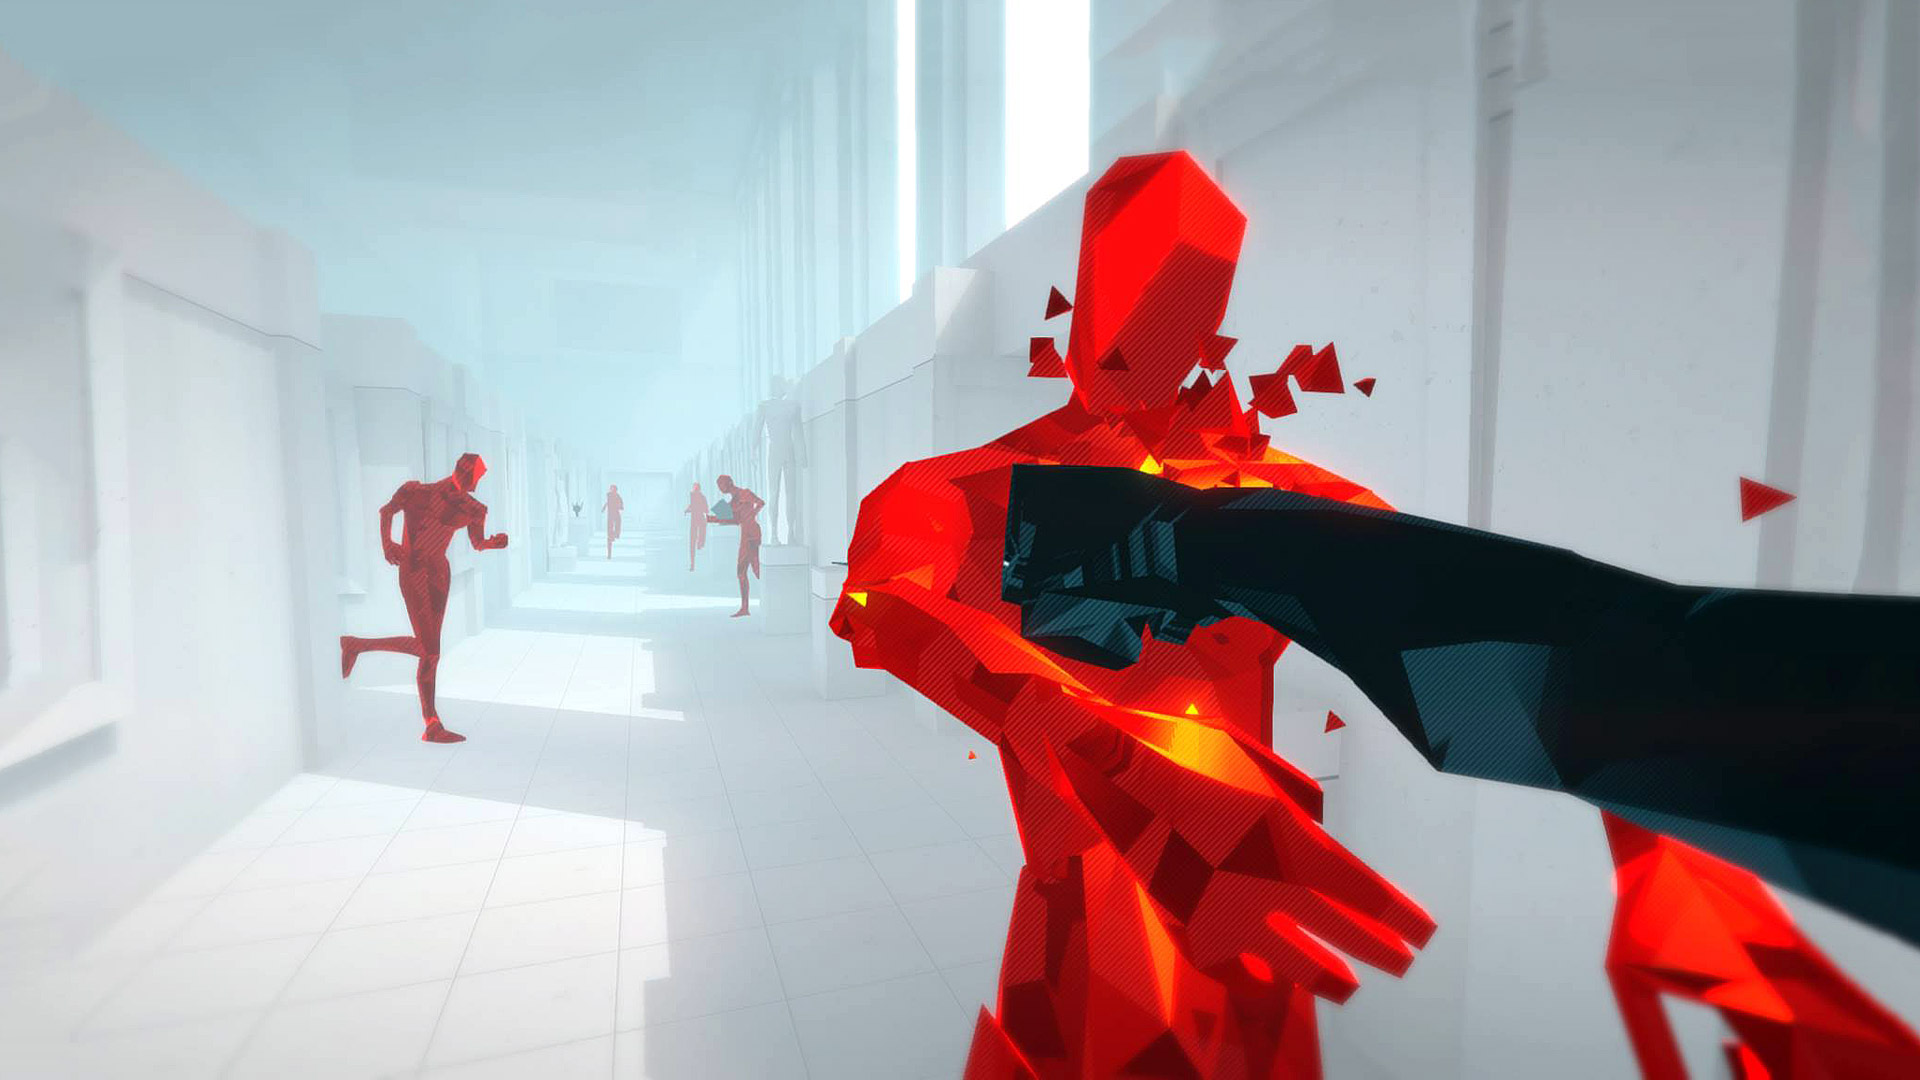 best vr virtual reality video games - Superhot VR video game